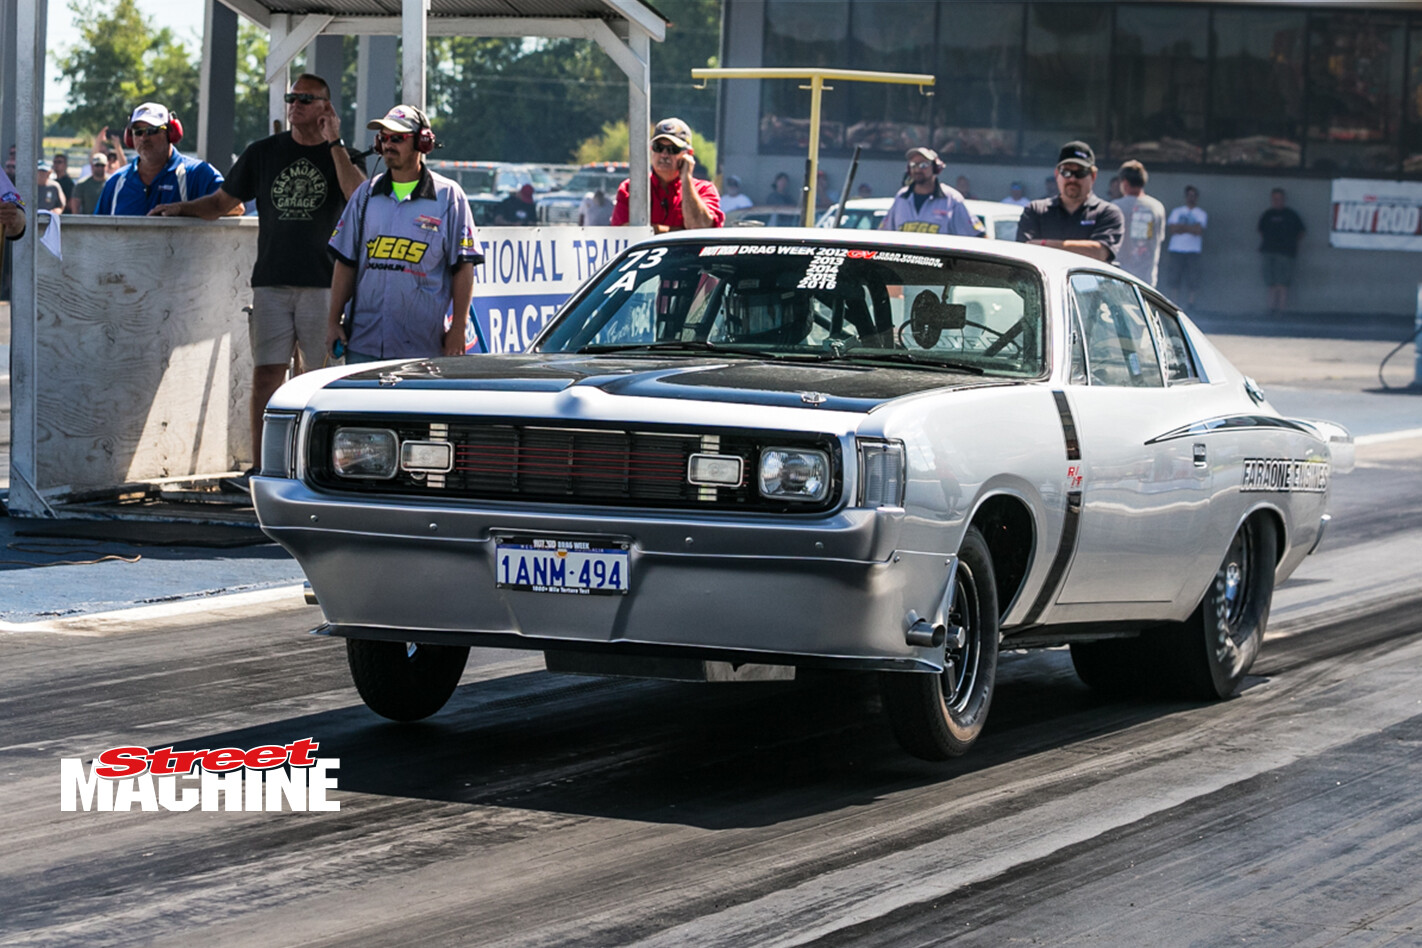 SCOTTY’S DRAG WEEK 2016 DAY ONE UPDATE – VIDEO